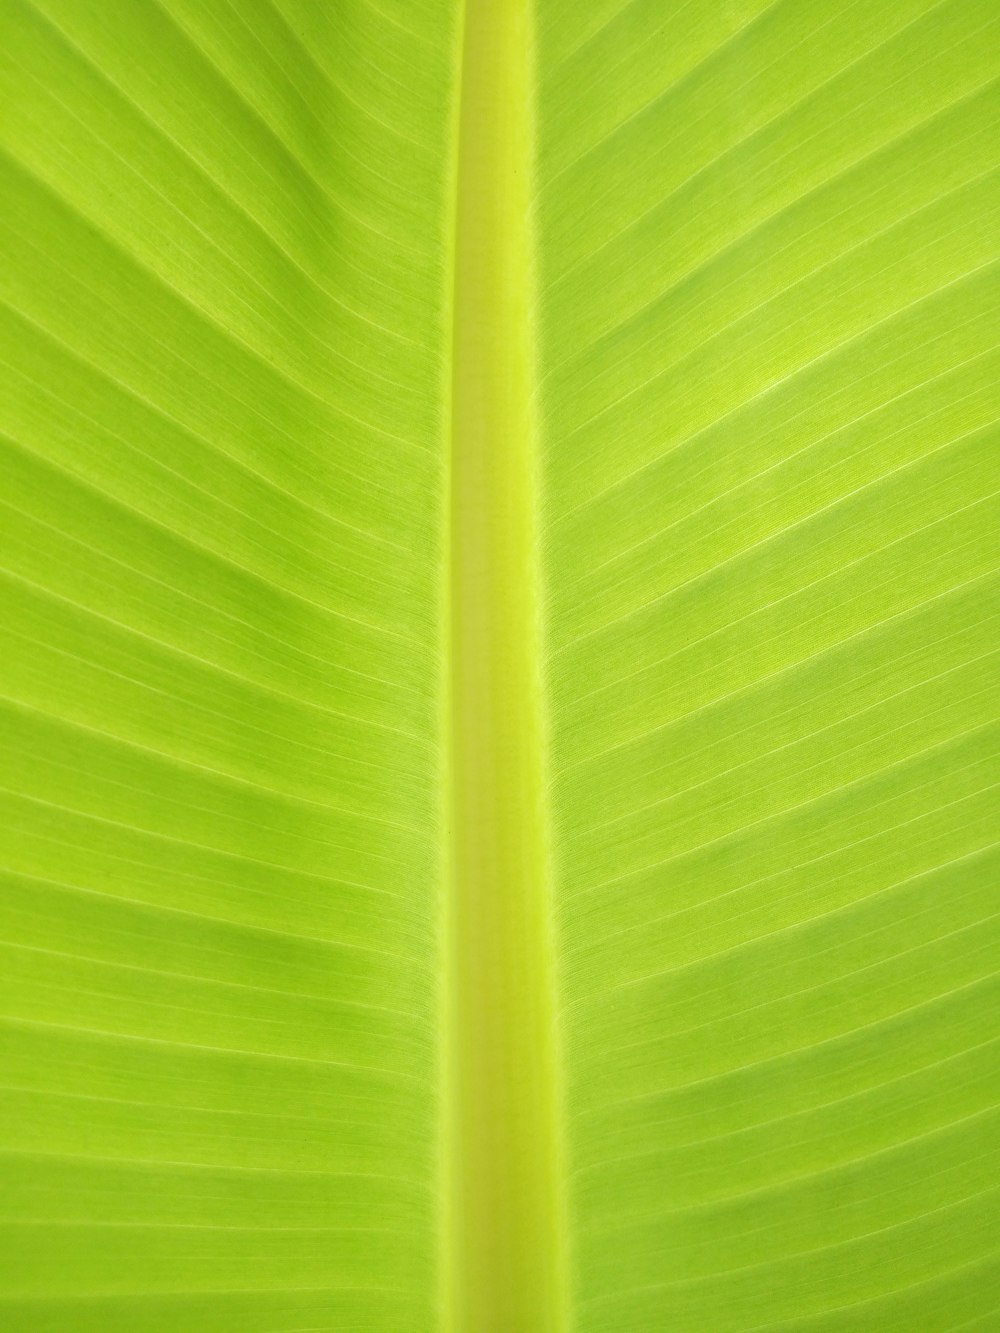 green textile in close up photography